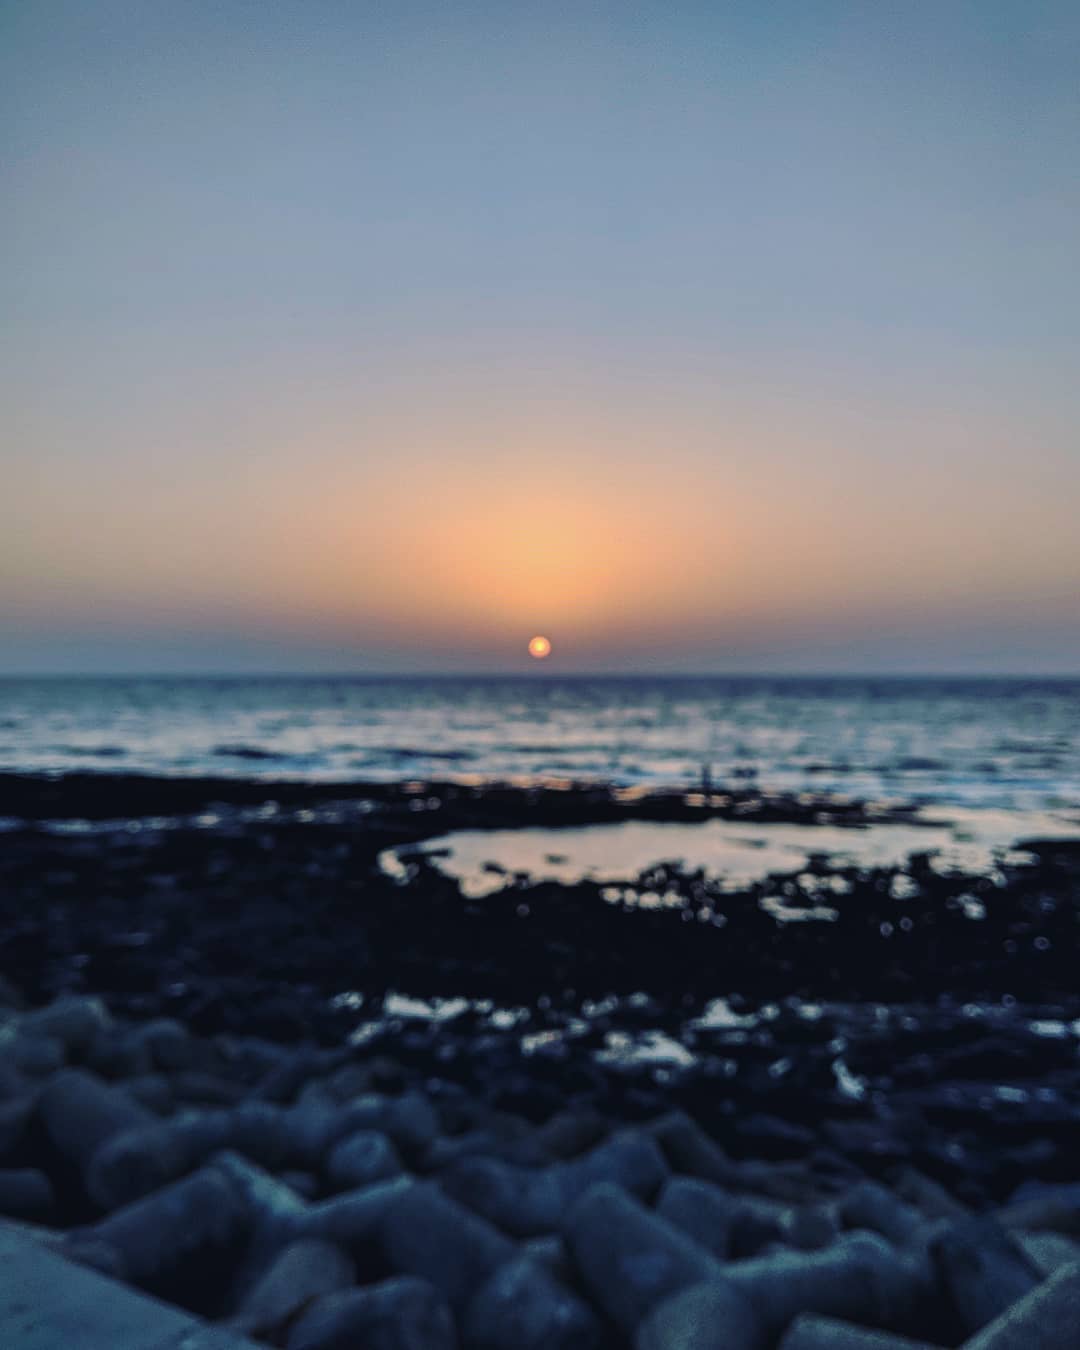 Out of focus sunset at Worli Seaface